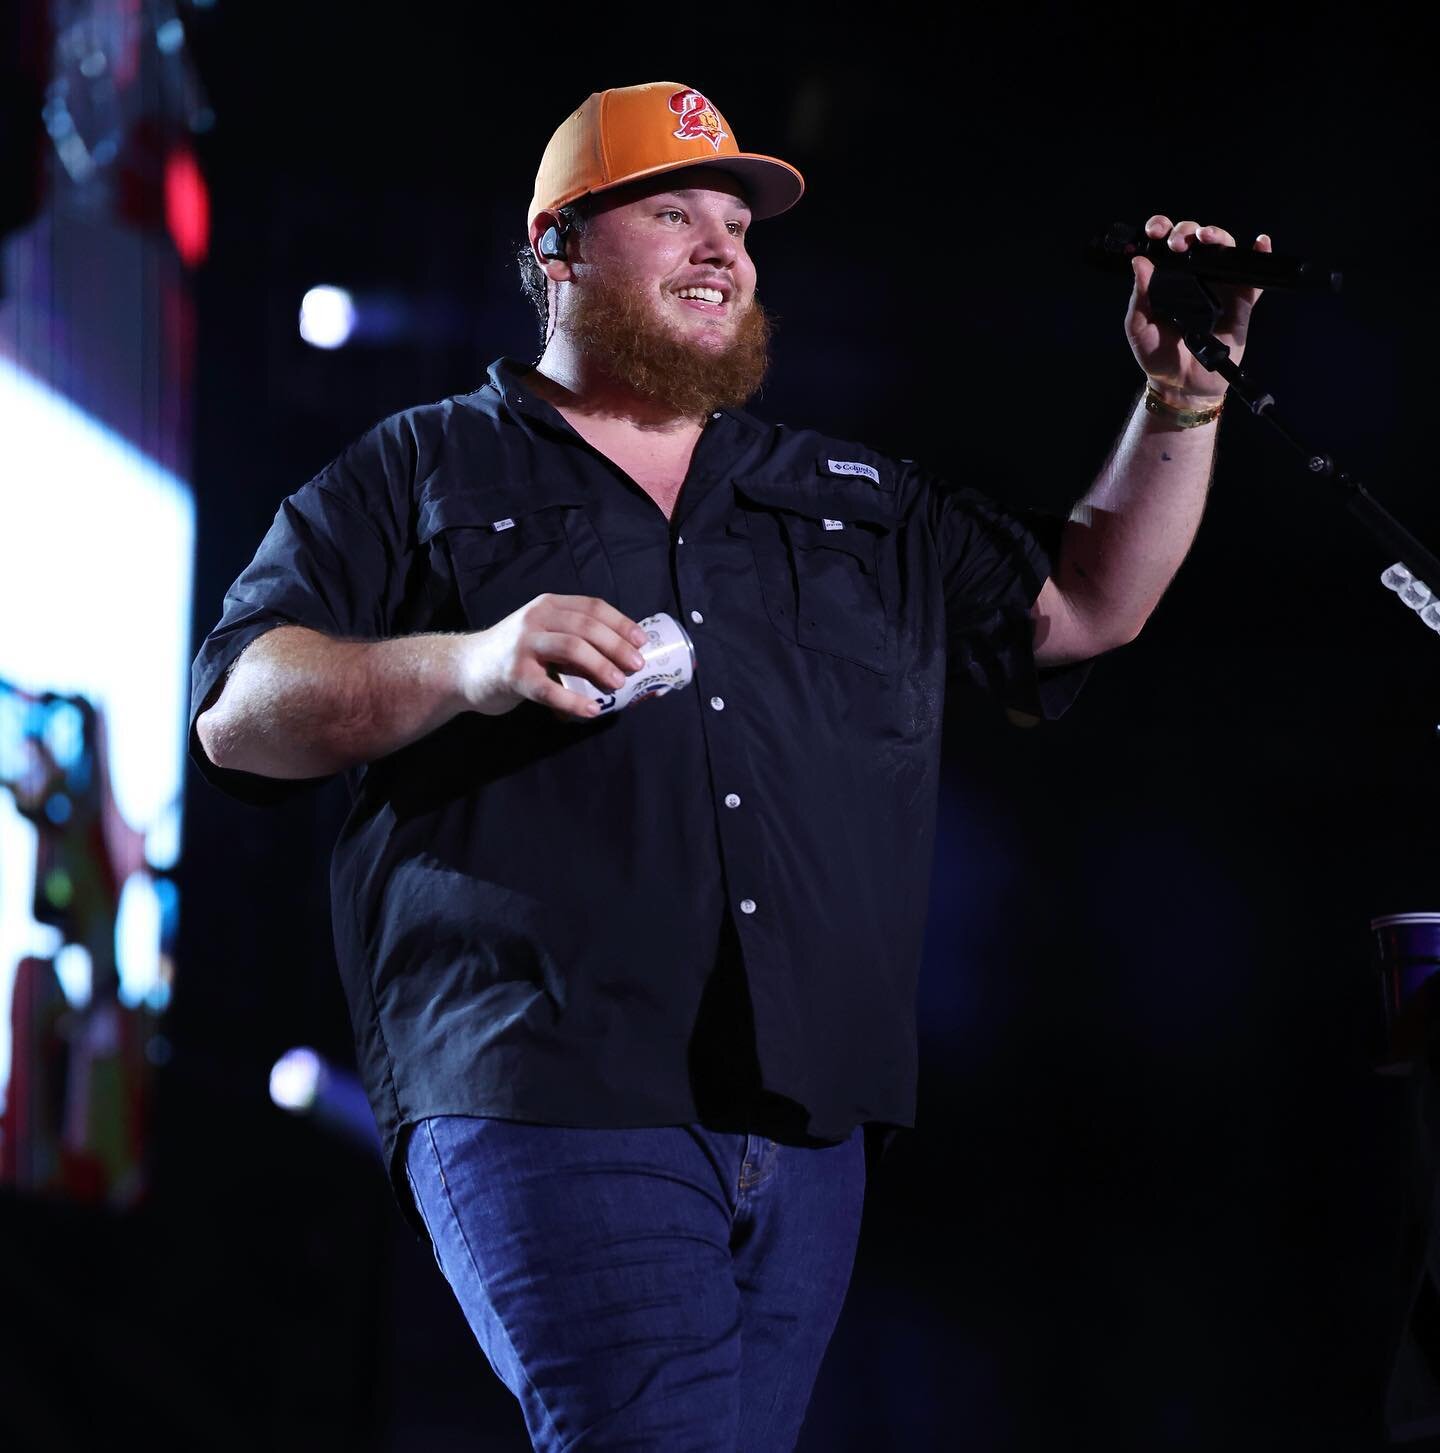 That is the smiling grin of a man to about HAVE SOME FUN! 😀 🍻 @lukecombs @buccaneers @millerlite #lukecombs #buccaneers #tampa #tampabay #tampabaybuccaneers #millerlite #shotgun #beer #shotgunbeer #grin #smile @davidbergman #shootfromthepit @canonu